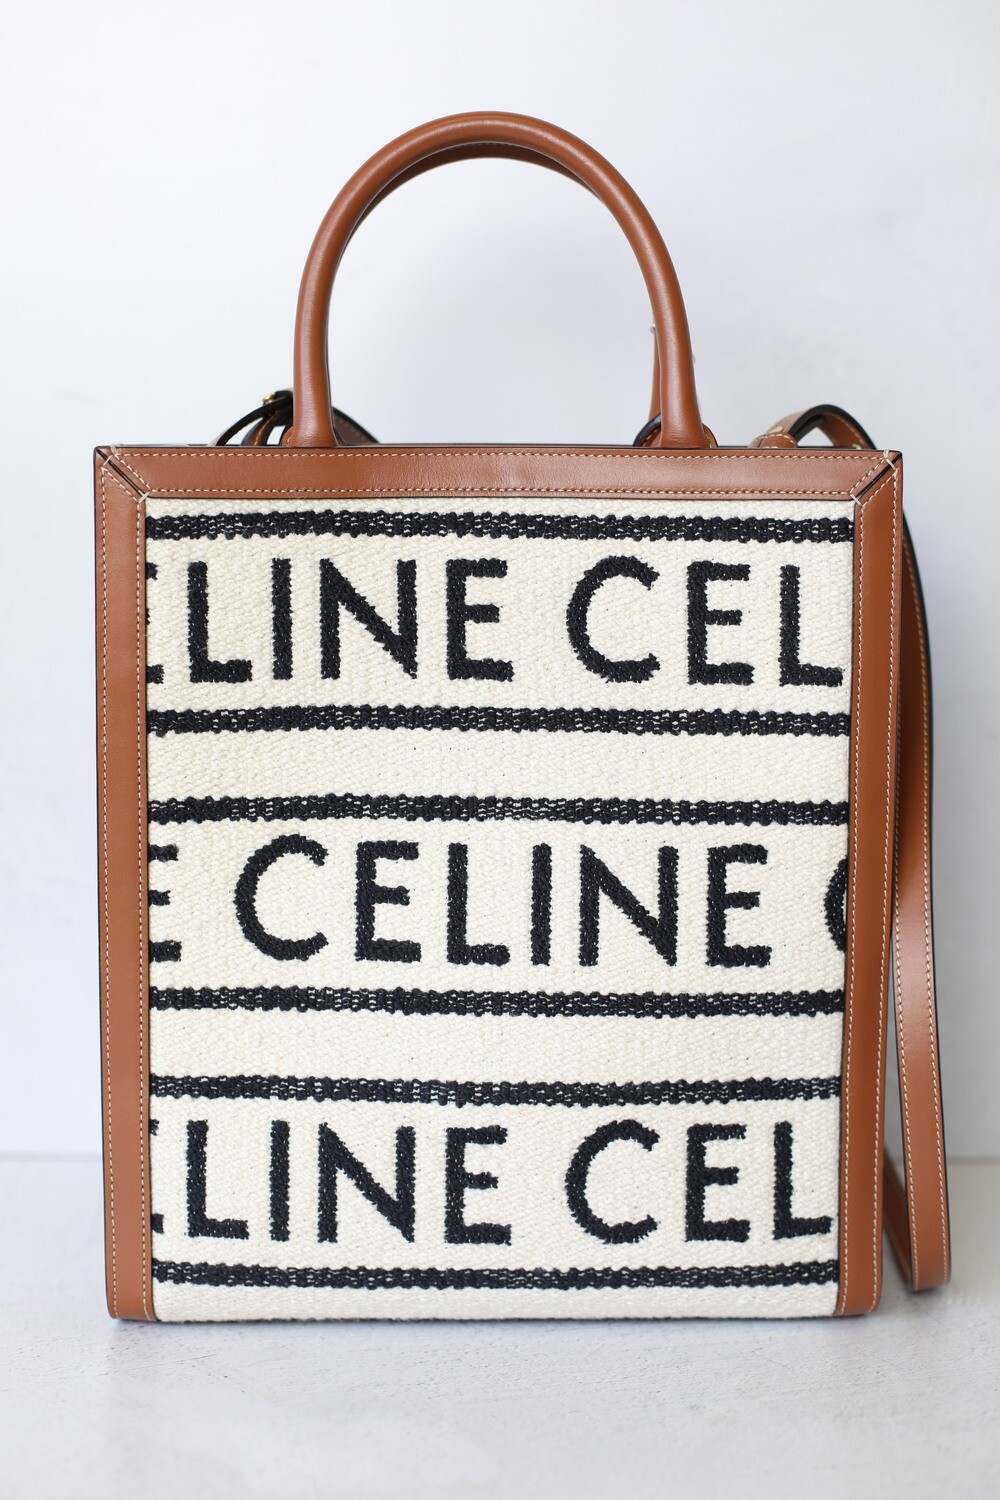 Celine Cabas Vertical Tote Small, White and Black Canvas with Tan Leather  Trim, Preowned no Dustbag WA001